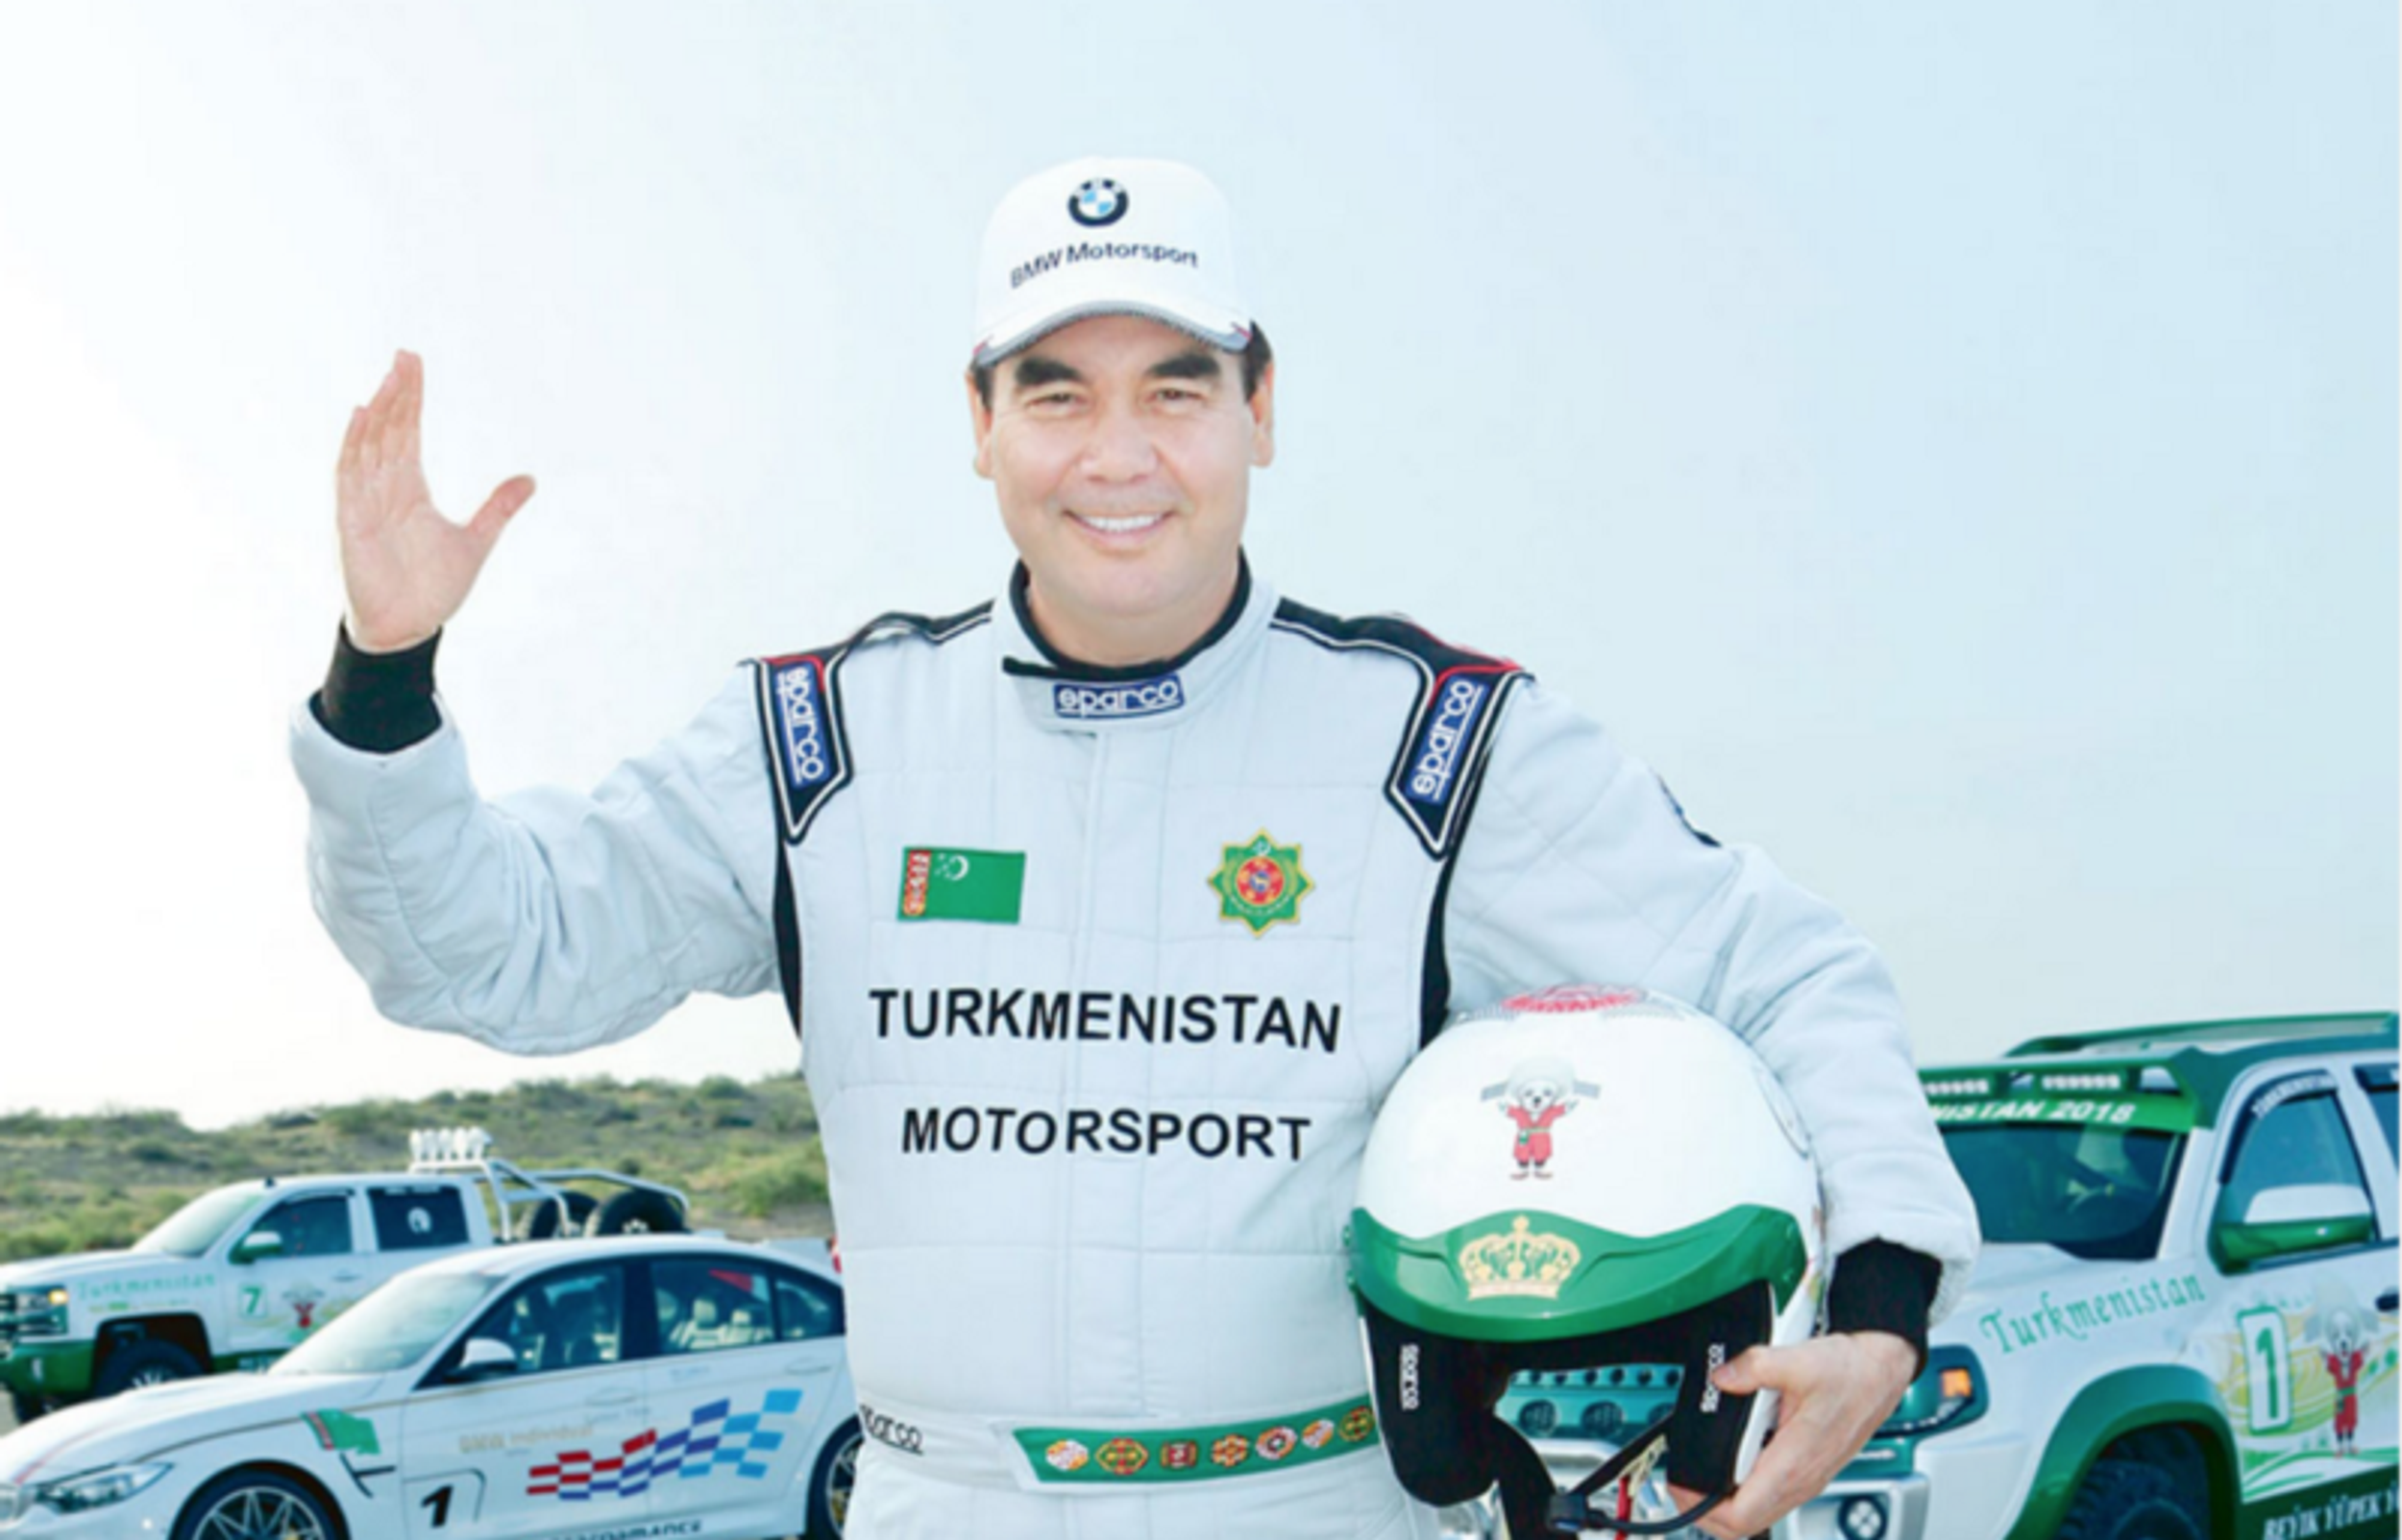 Photo of the Week: A Turkmen for All Seasons